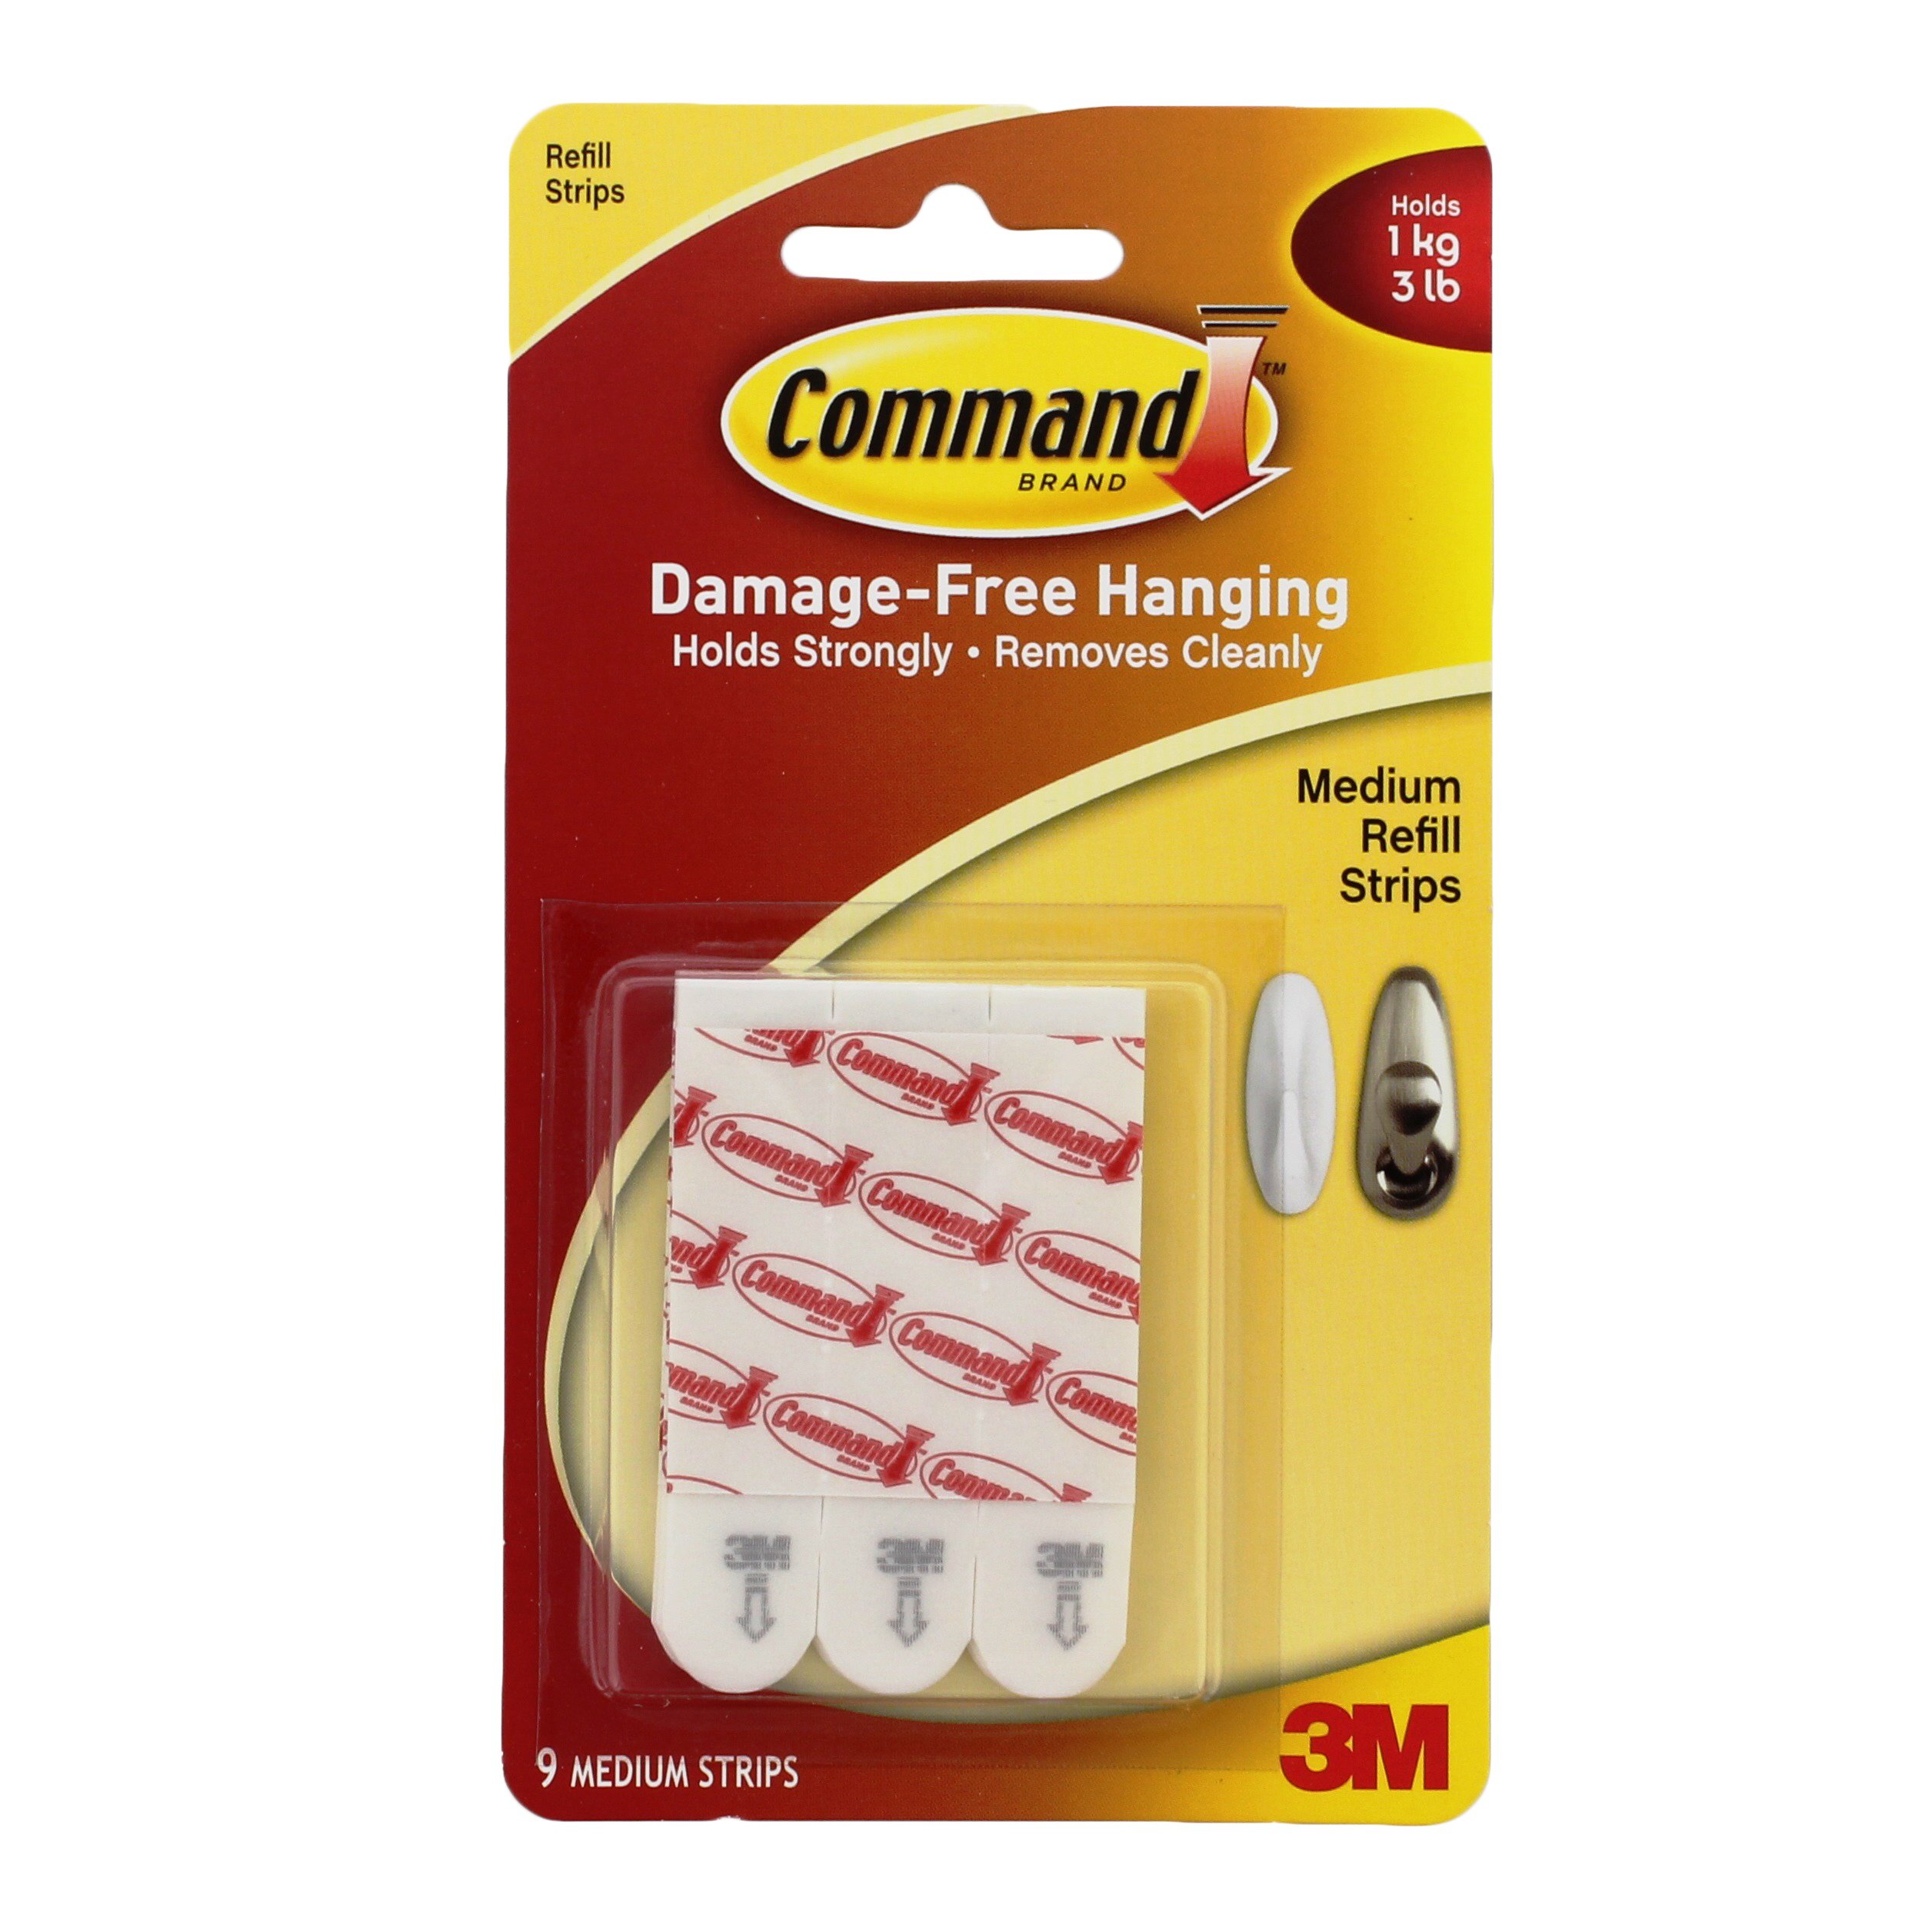 3M Command Strips Double Sided Adhesive Refill Small Medium Large FREE P&P 